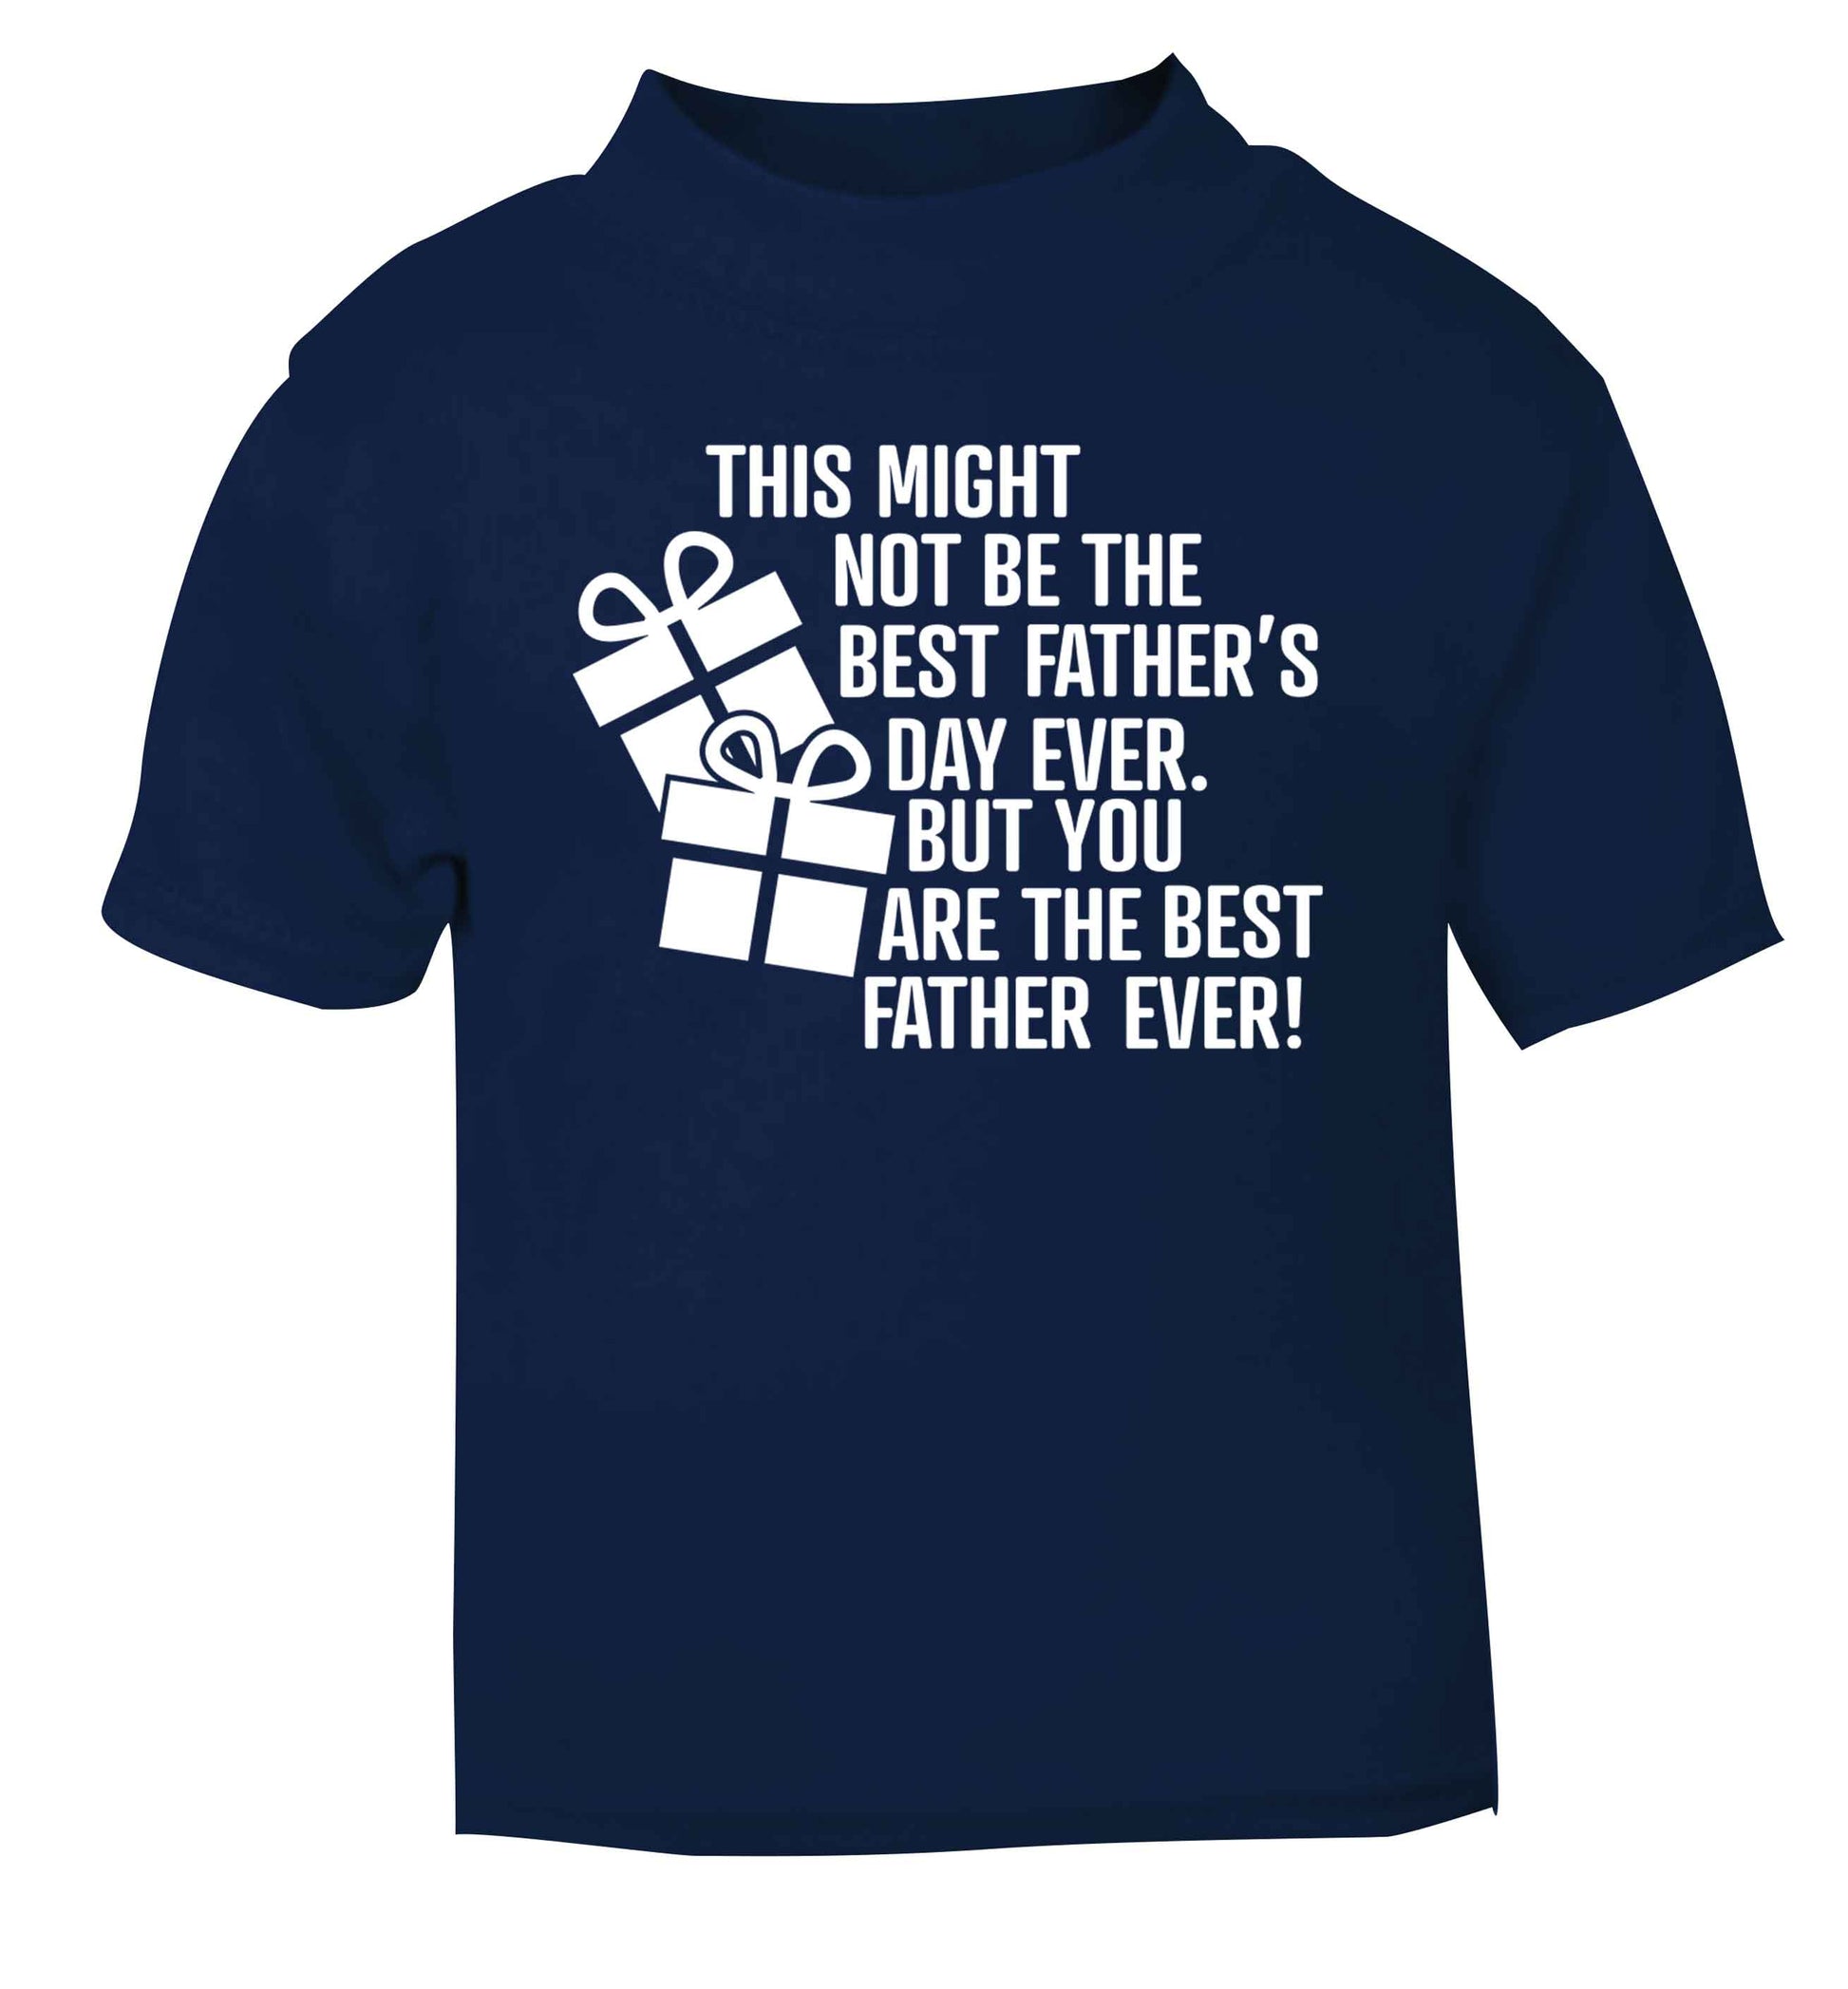 It might not be the best Father's Day ever but you are the best father ever! navy baby toddler Tshirt 2 Years